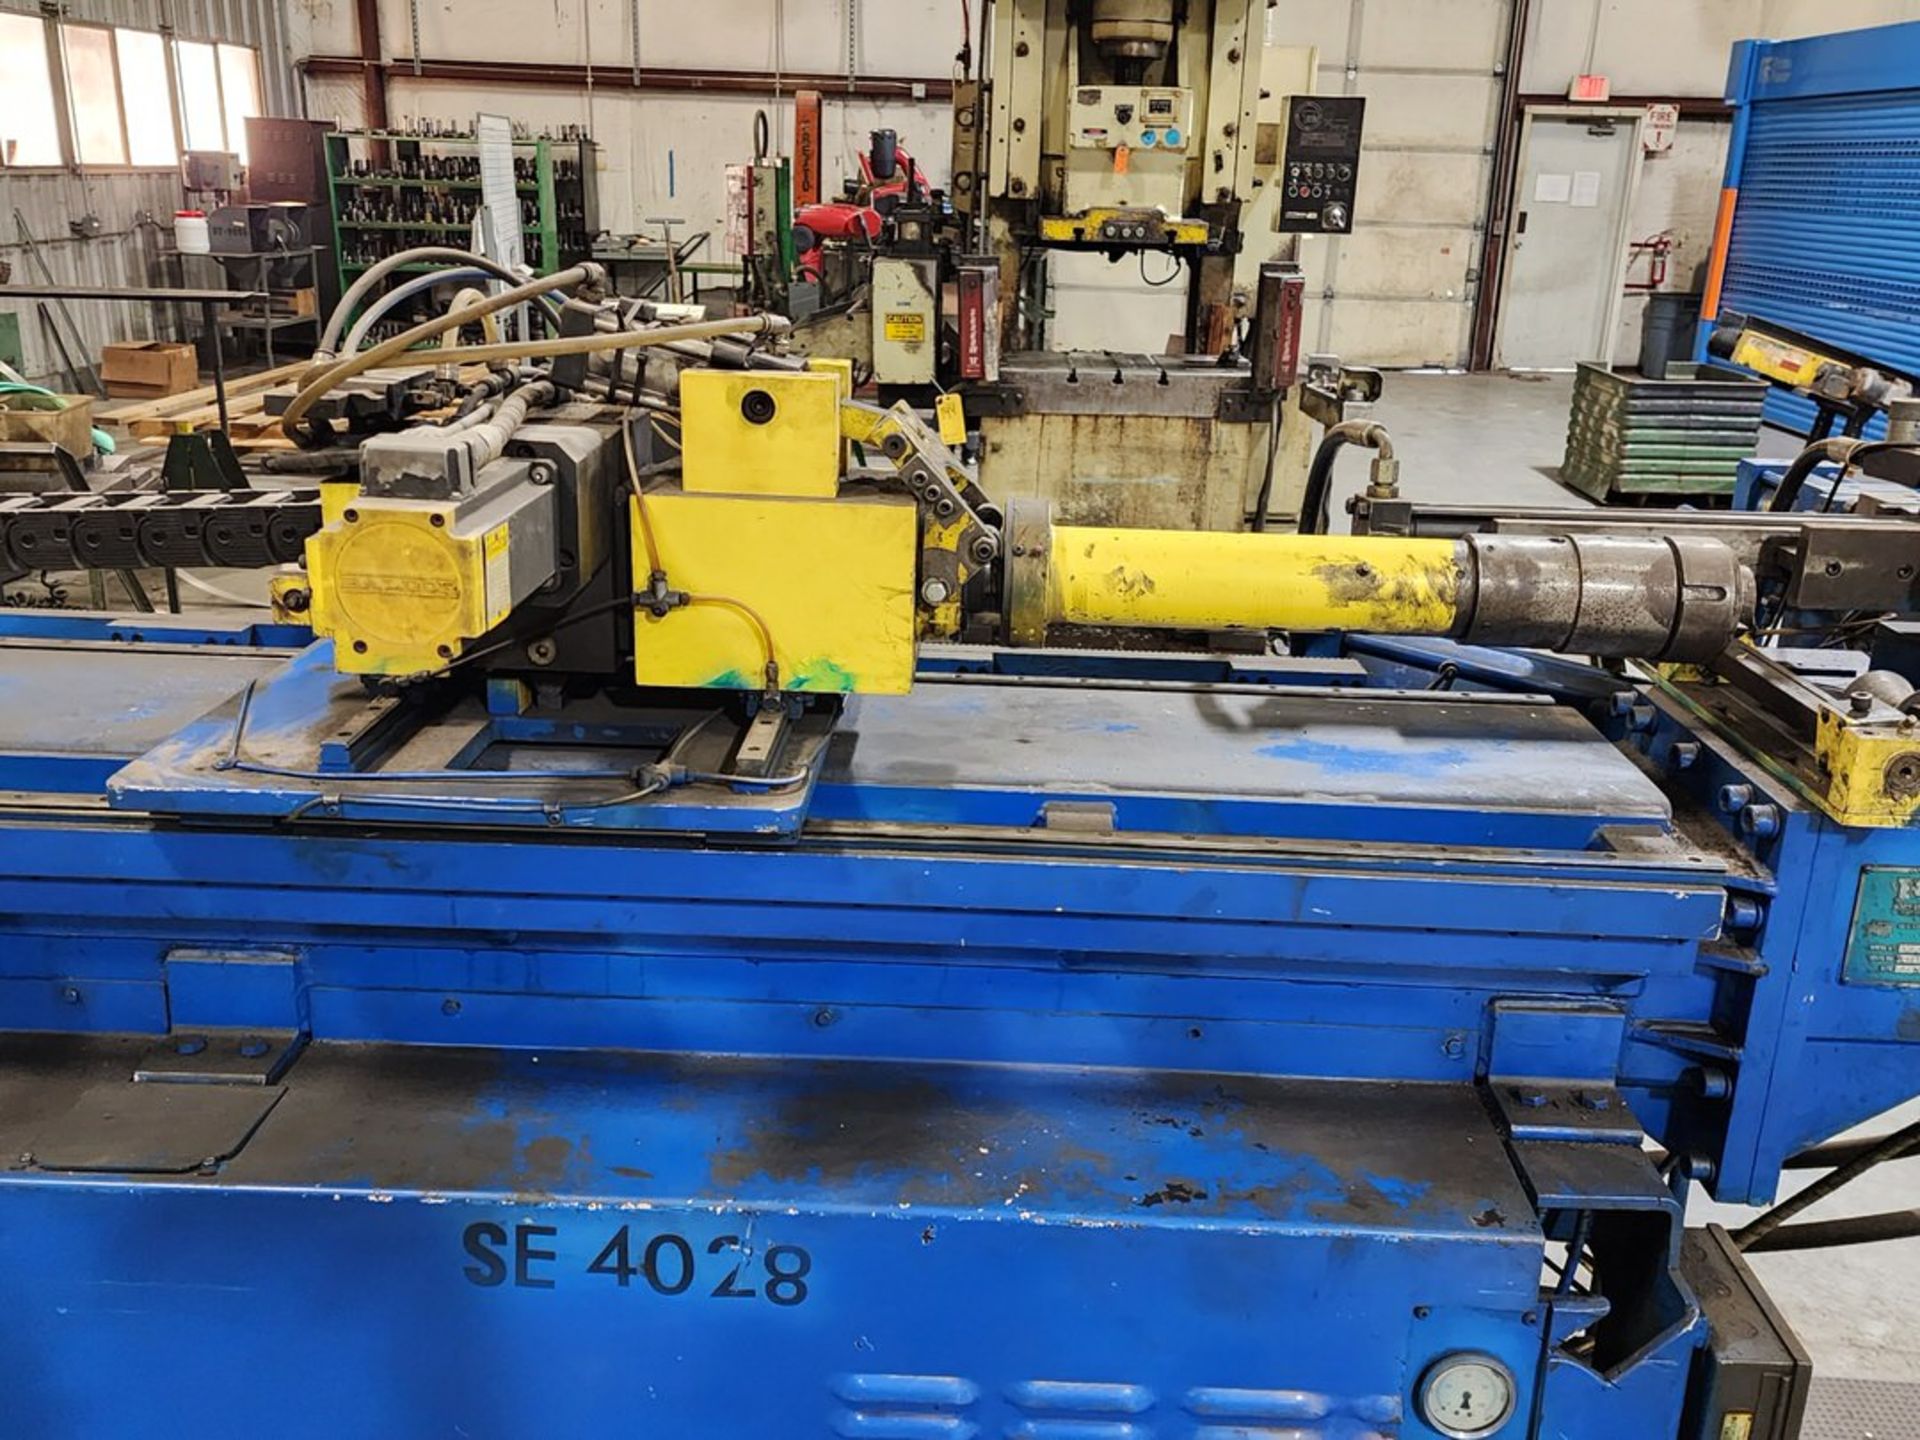 Horn CNC Hyd Tube Bender 1.5"; W/ Controller, DOM: 2006 - Image 11 of 15